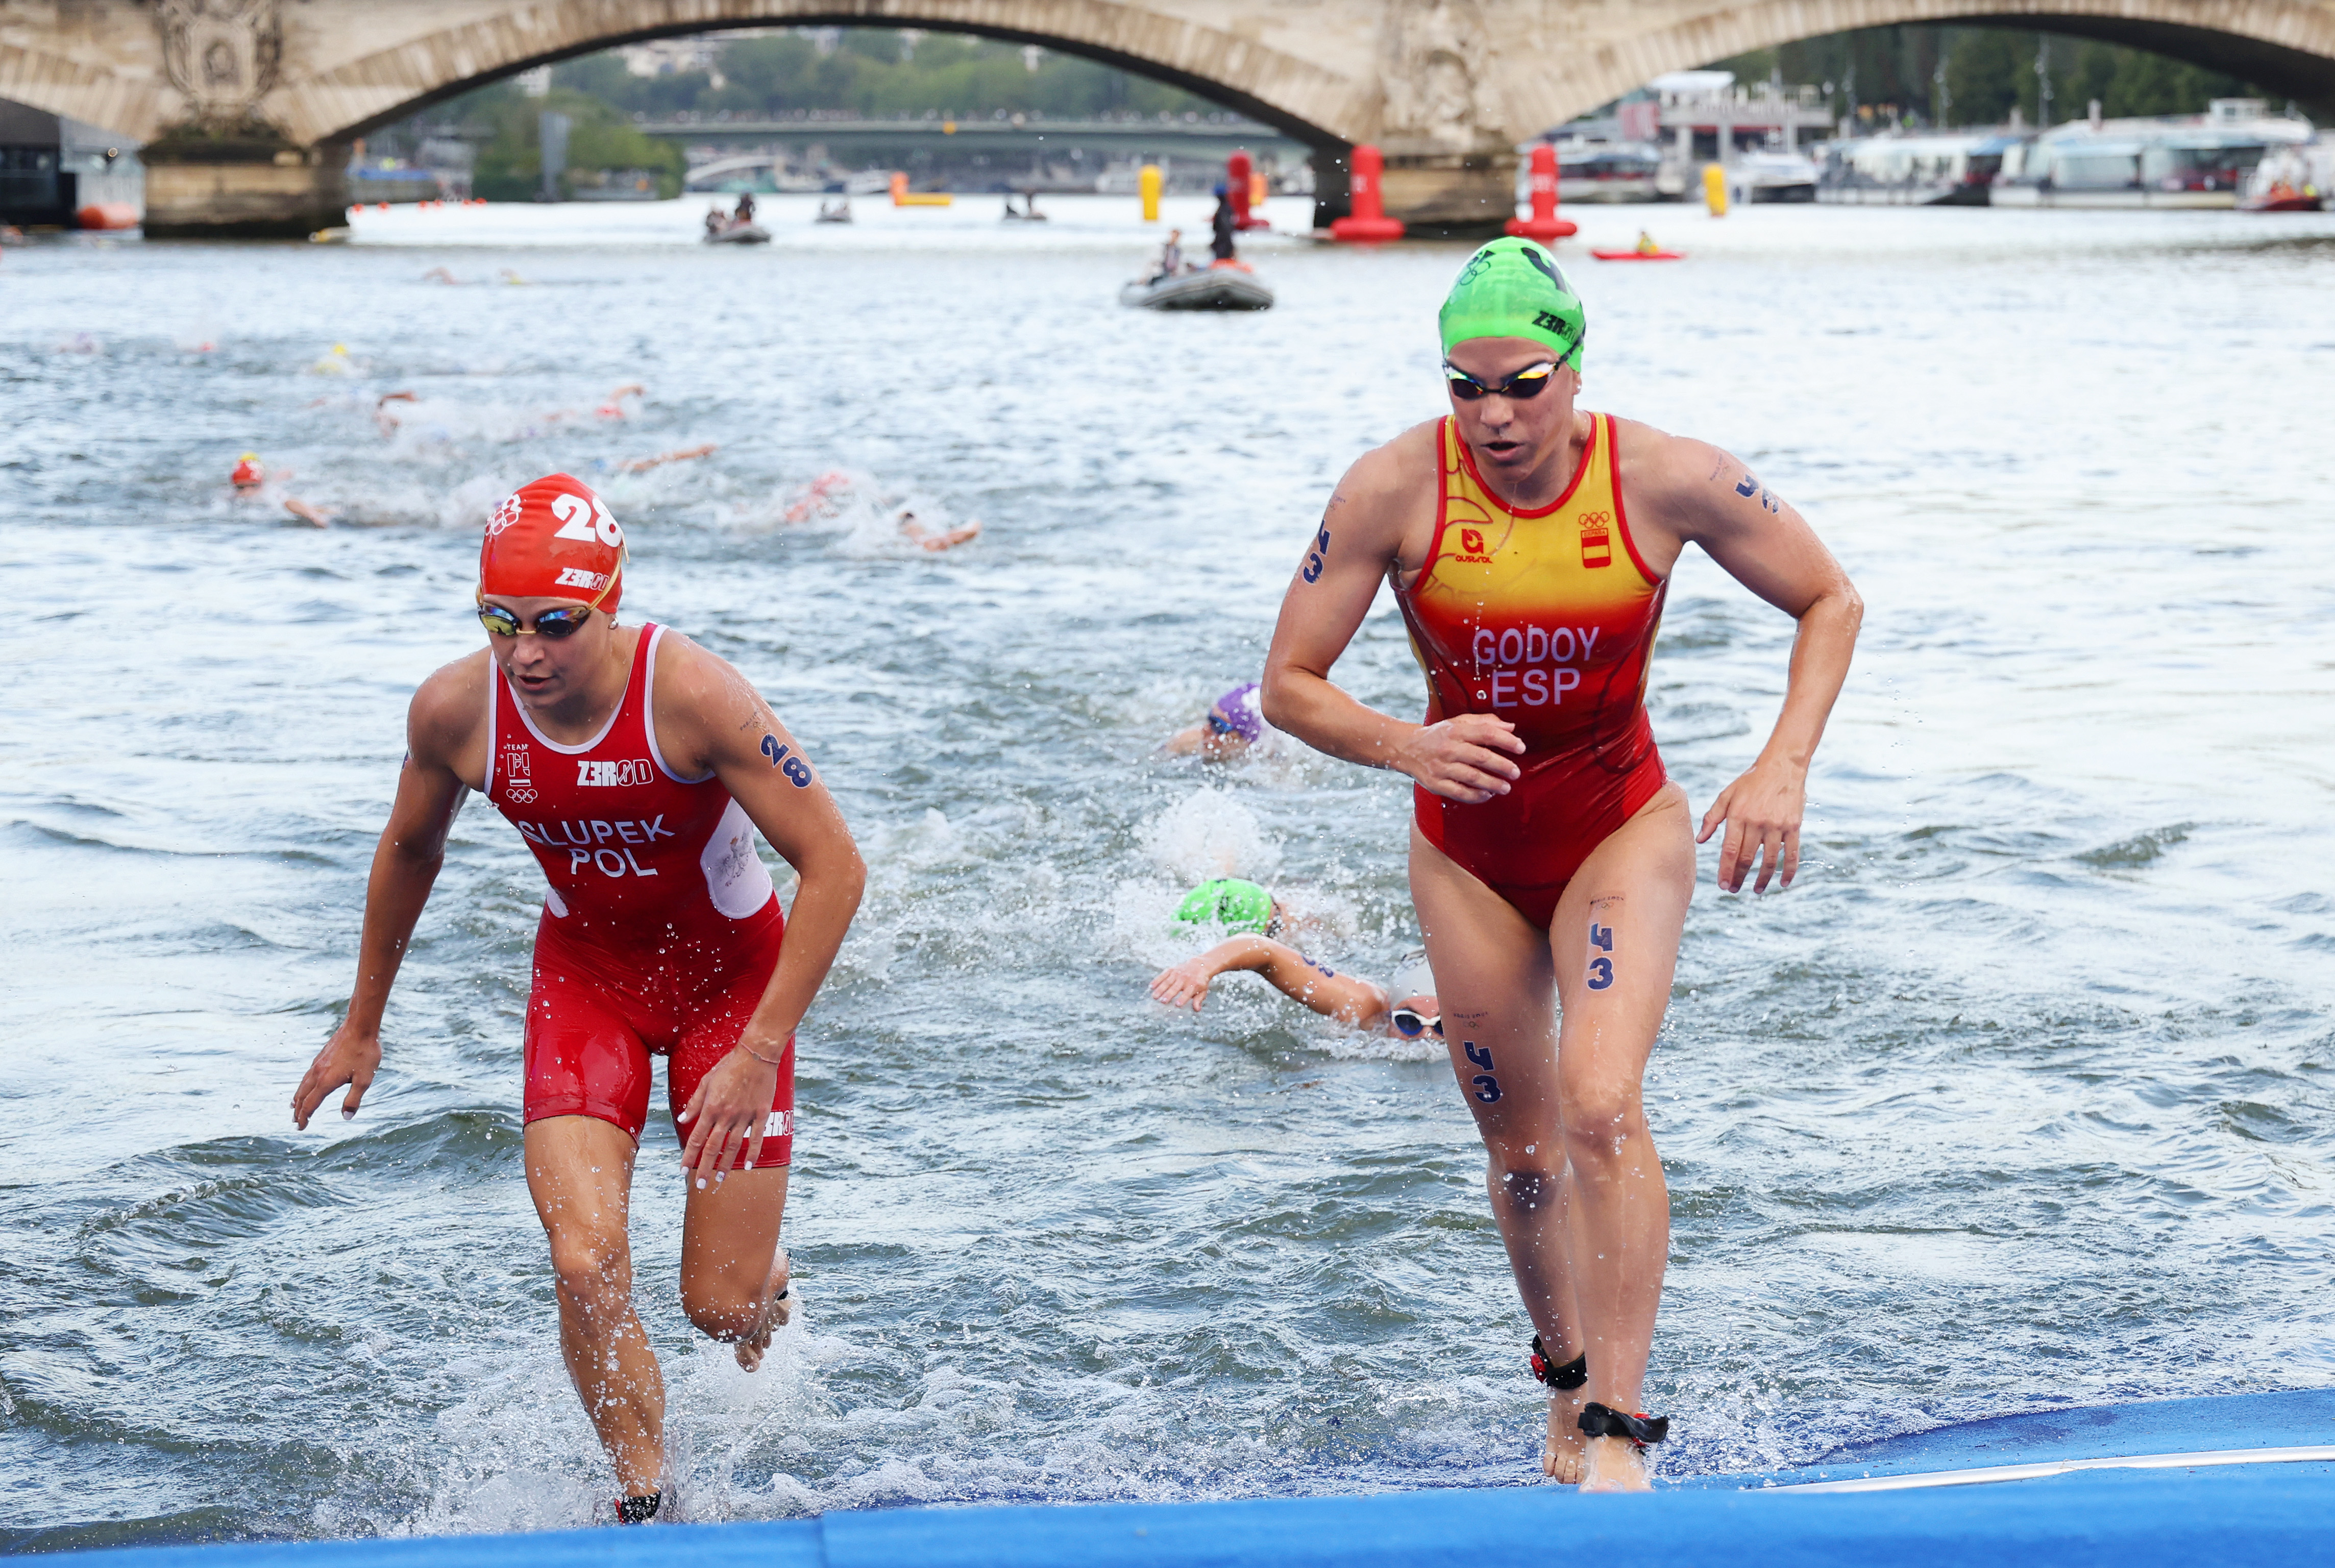 PARIS, FRANCE - JULY 31: Anna Godoy Contreras of Team Spain and Roksana Slupek of Team Poland compete during Women's Individual Triathlon on day five of the Olympic Games Paris 2024 at Pont Alexandre III on July 31, 2024 in Paris, France. (Photo by Ezra Shaw/Getty Images)